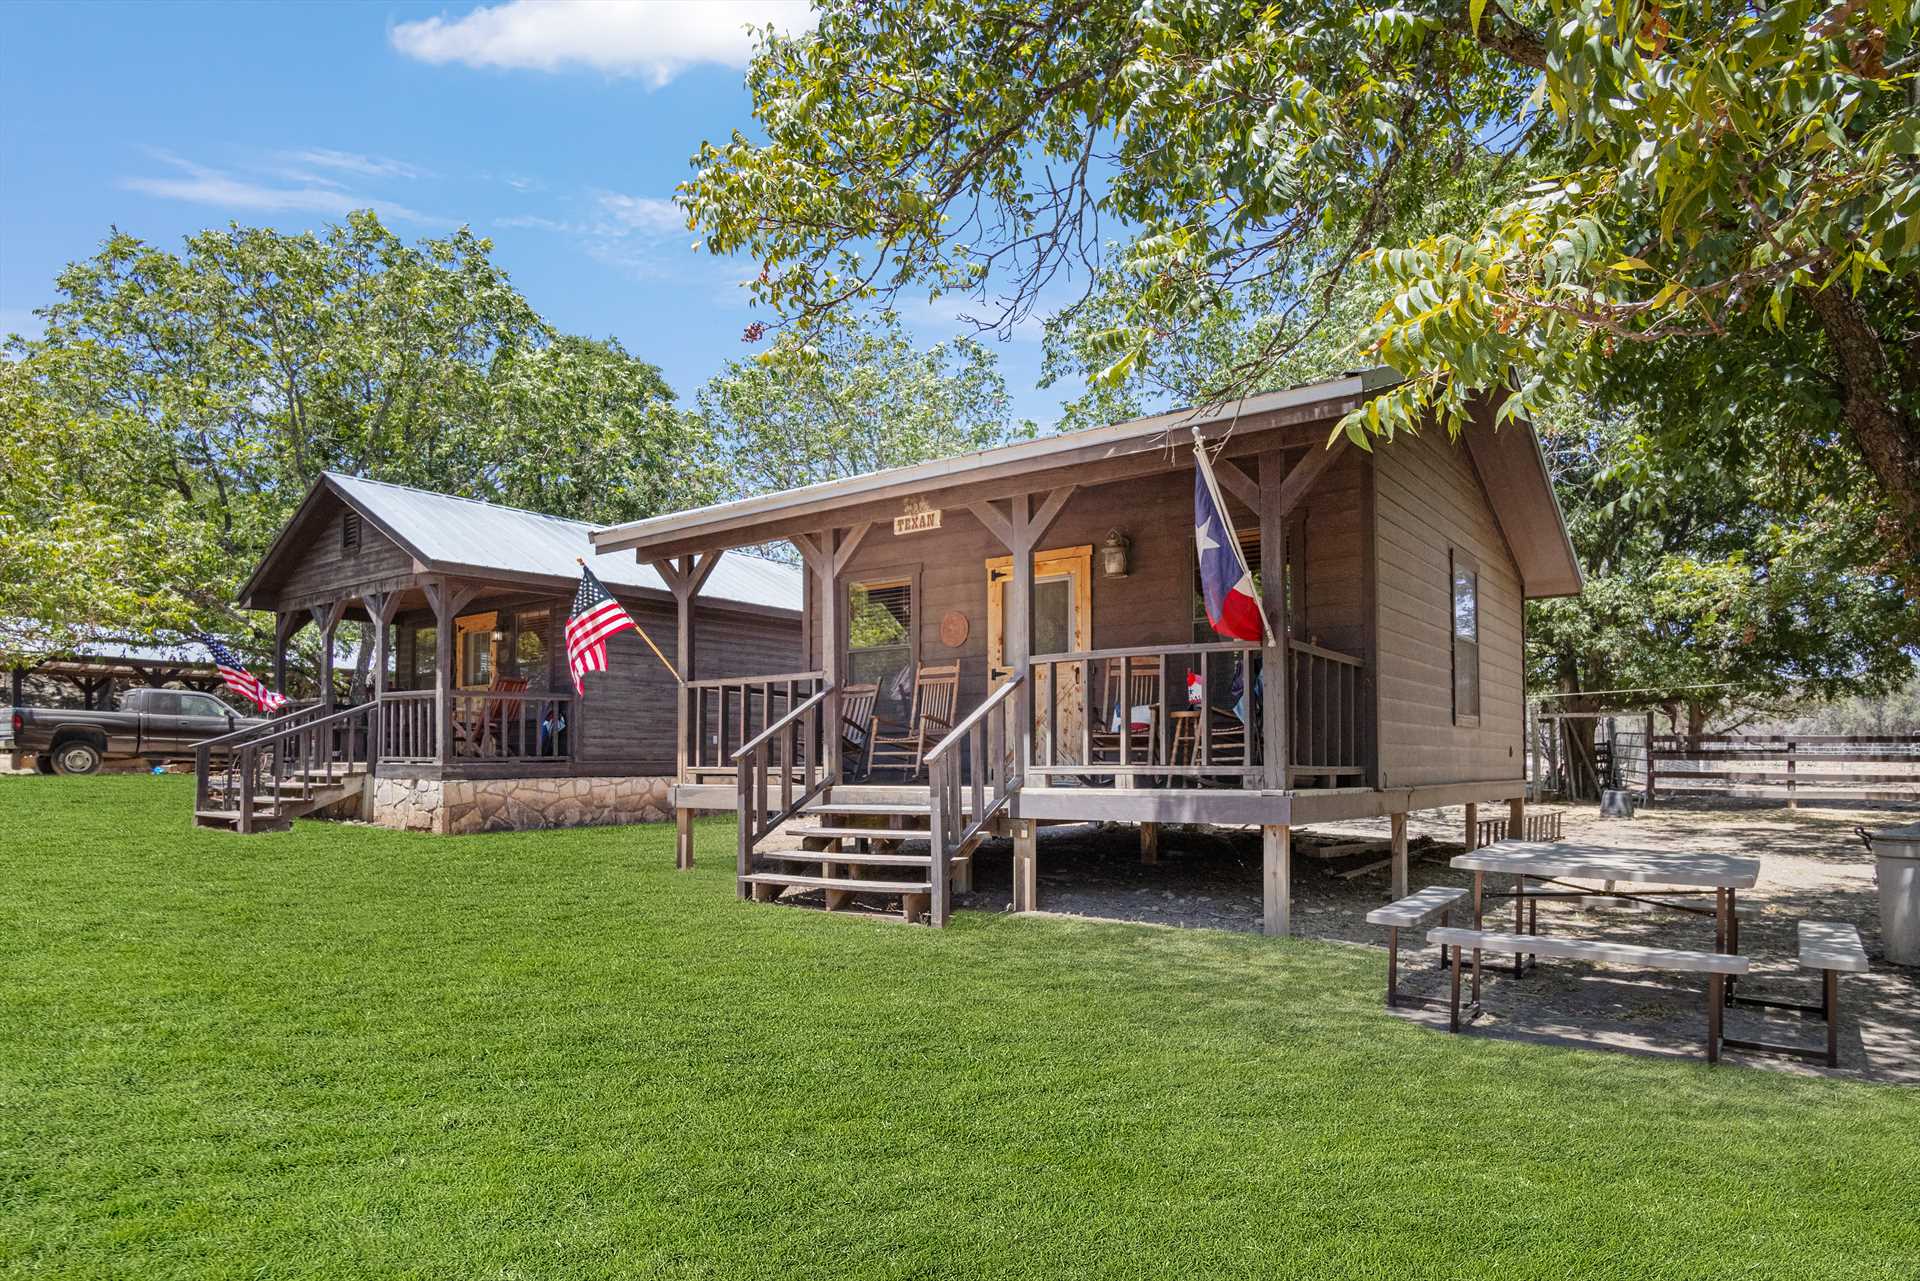                                                 Treat yourself to a creekside retreat in a beautiful corner of the Hill Country at the Texan Cabin at Double U Barr Ranch!